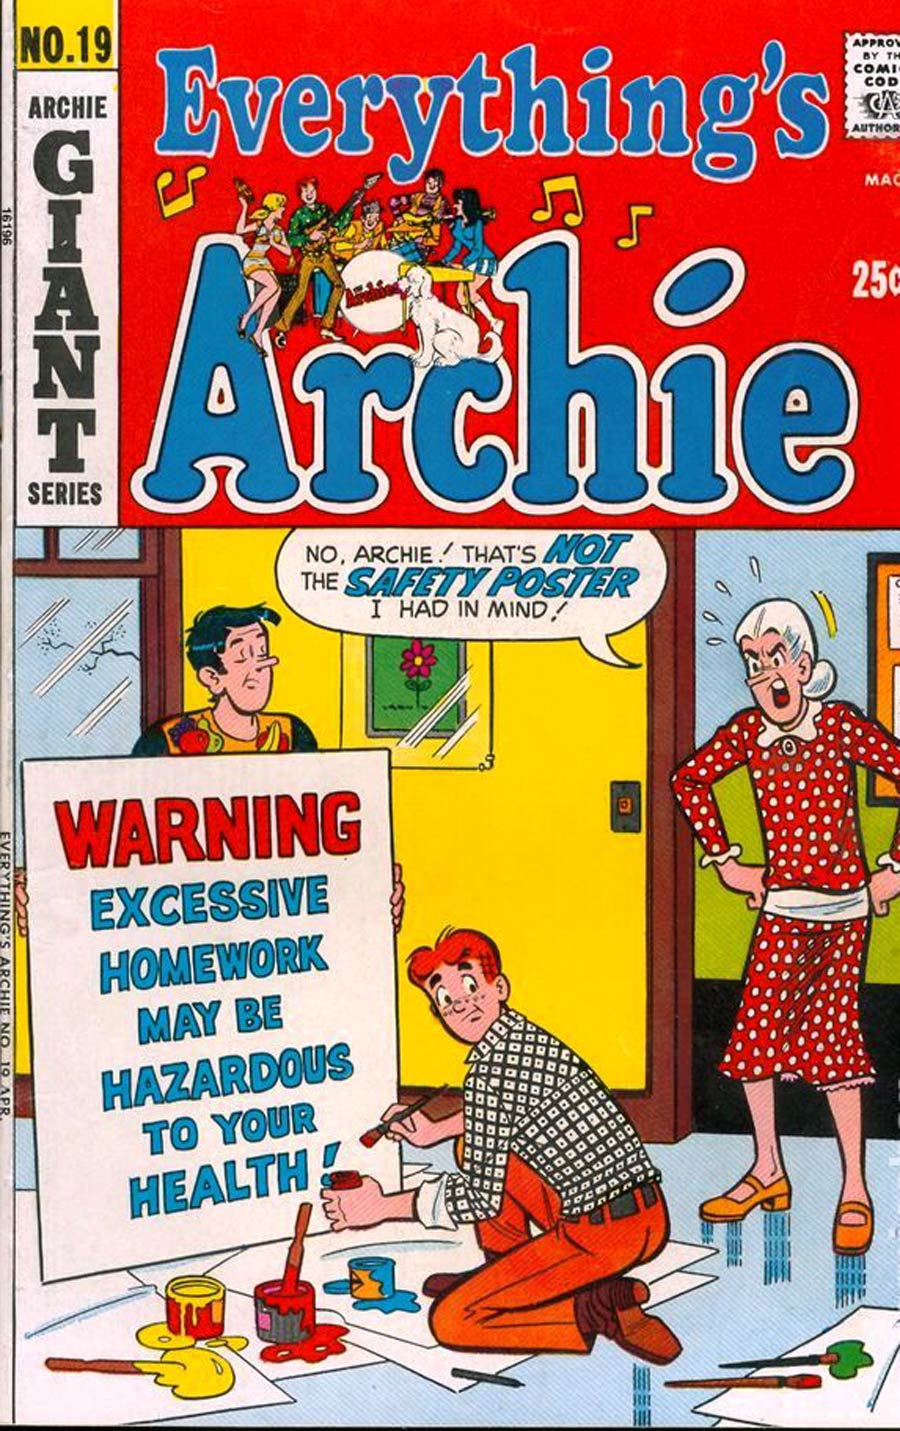 Everythings Archie #19